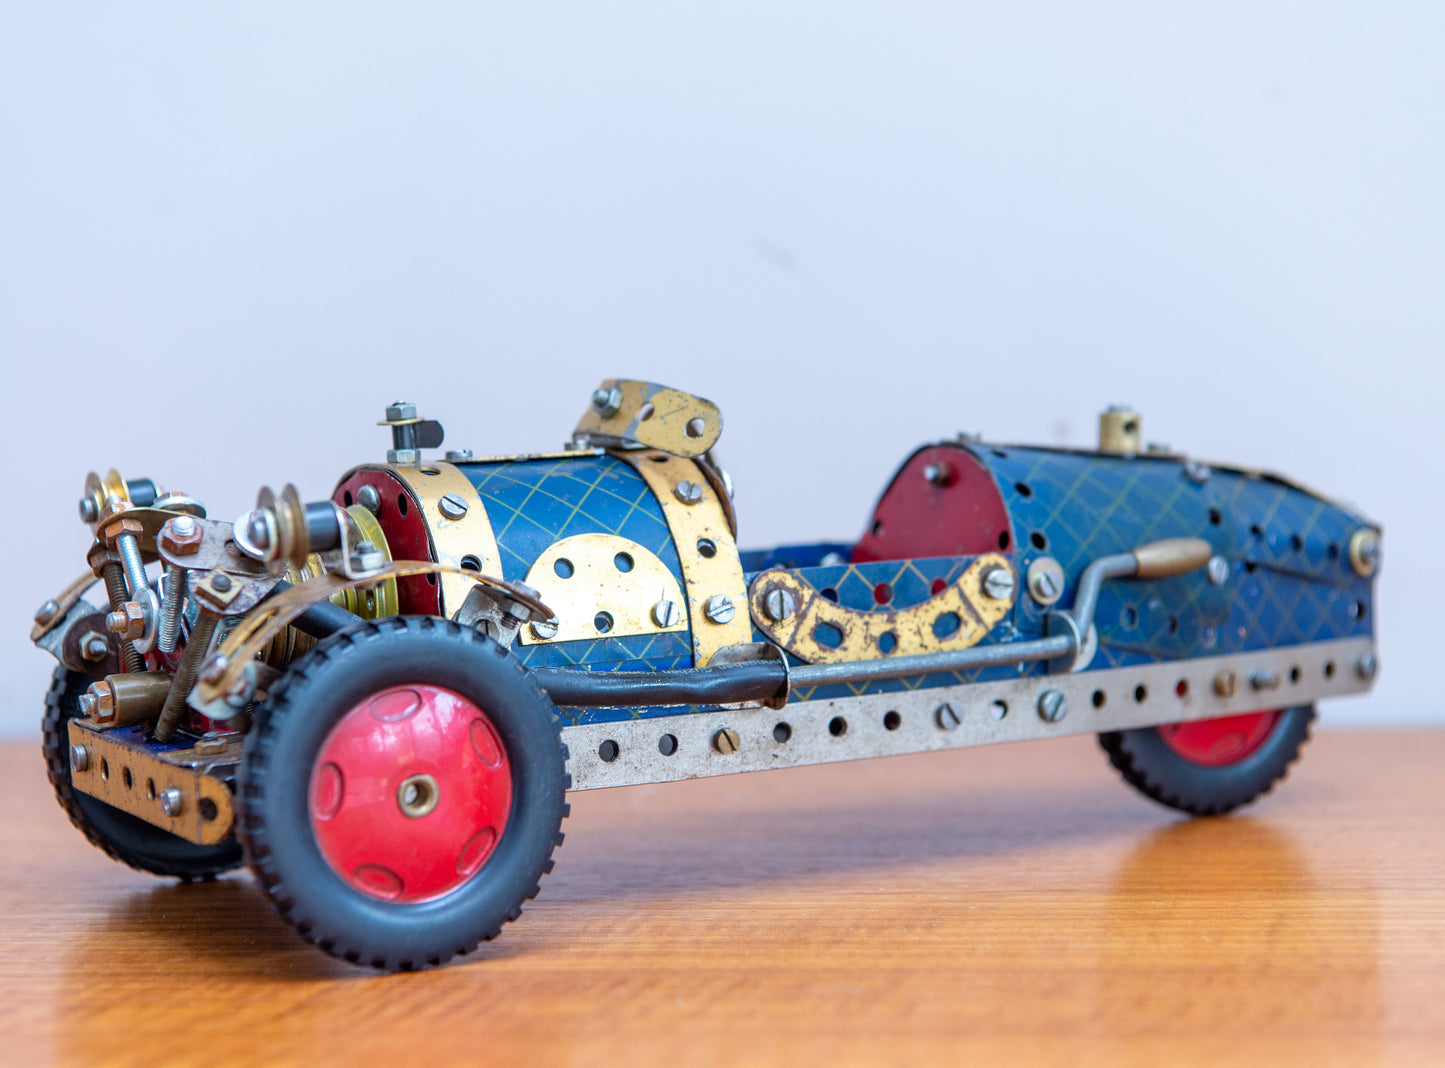 A Fine Scratch Built Meccano 3 Wheel Racing Car In Red Blue And Gold. Made In England. Circa 1940